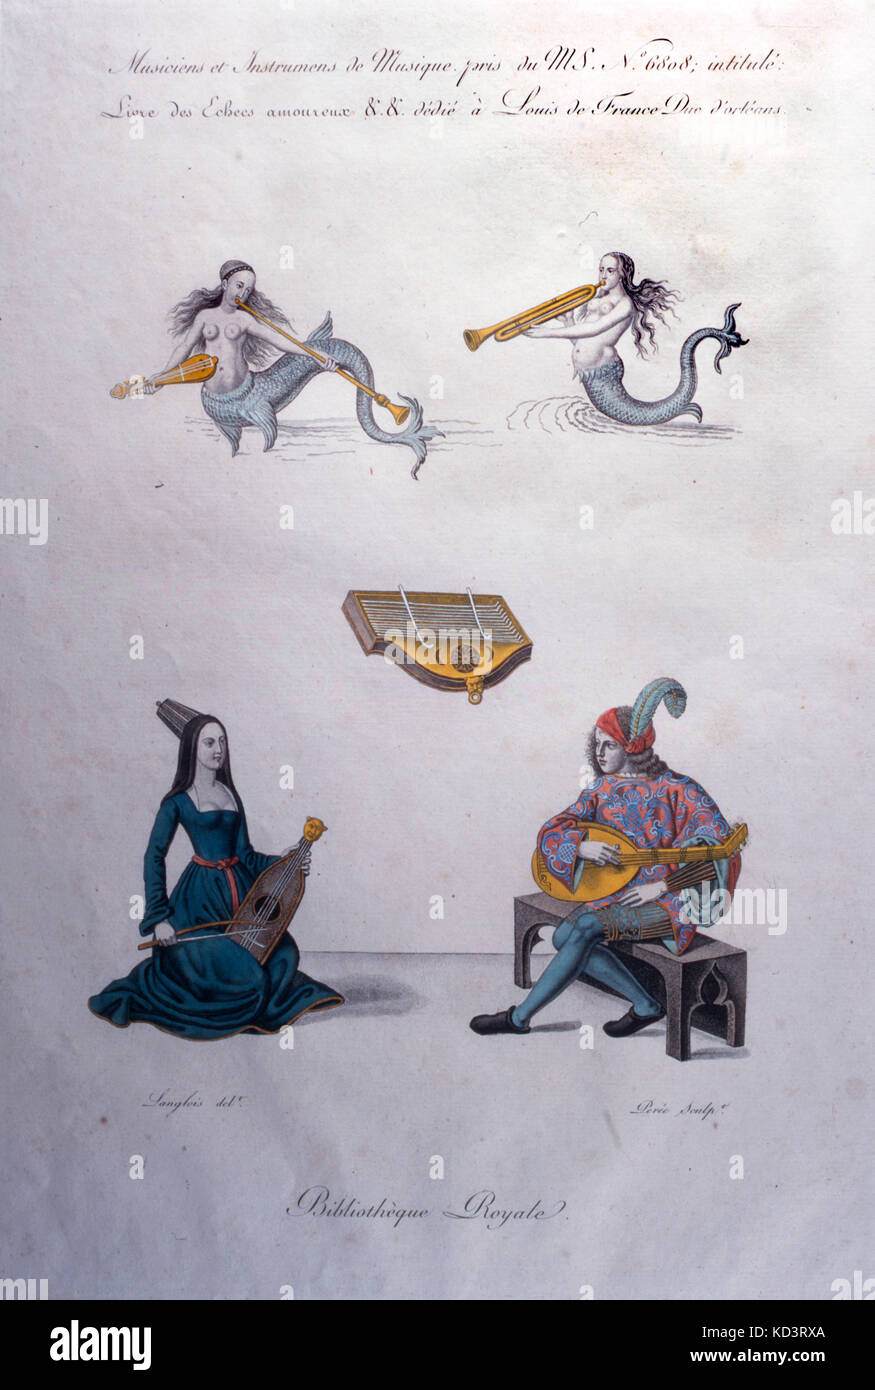 Medieval instruments - Mermaids pictured playing rebec, straight trumpet, and natural trumpet. Zither in centre. Lady and Gentleman of playing and lute respectively. Stock Photo